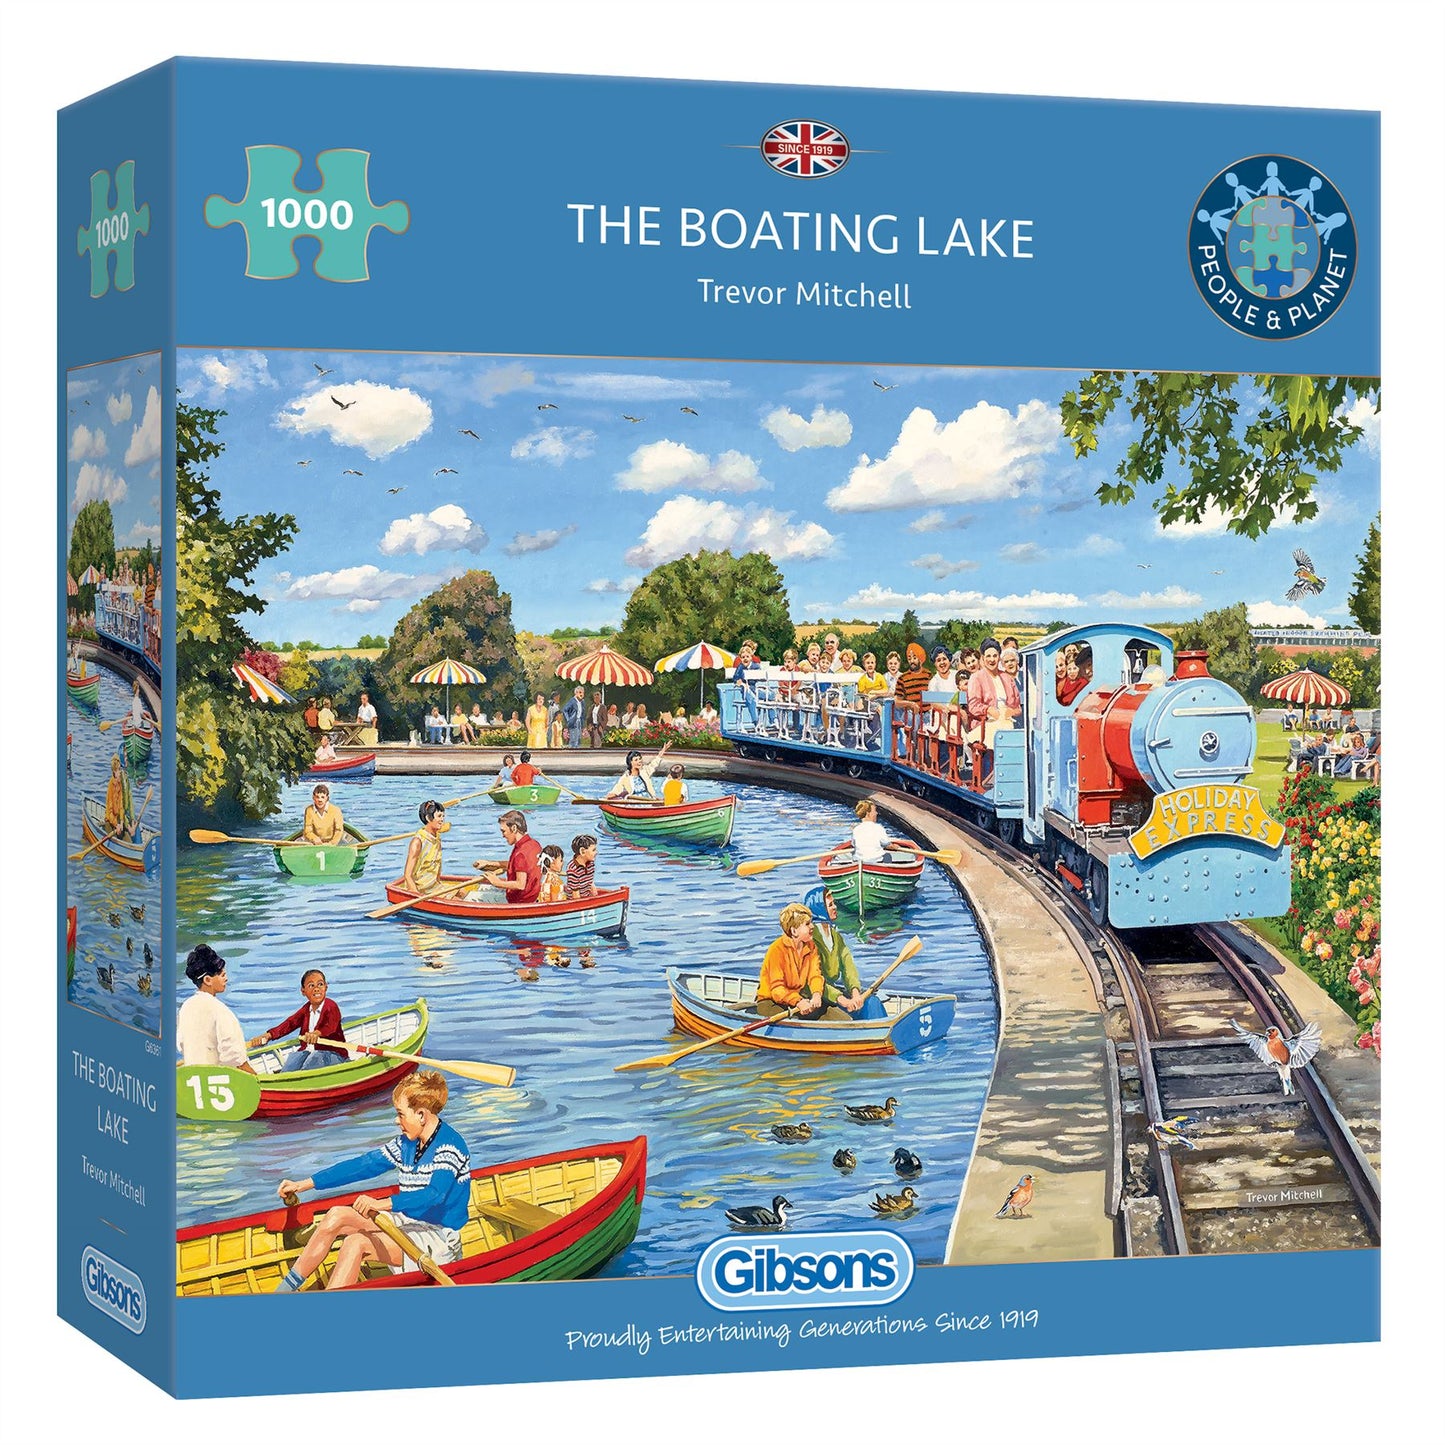 The Boating Lake 1000 Piece Jigsaw Puzzle Gibsons